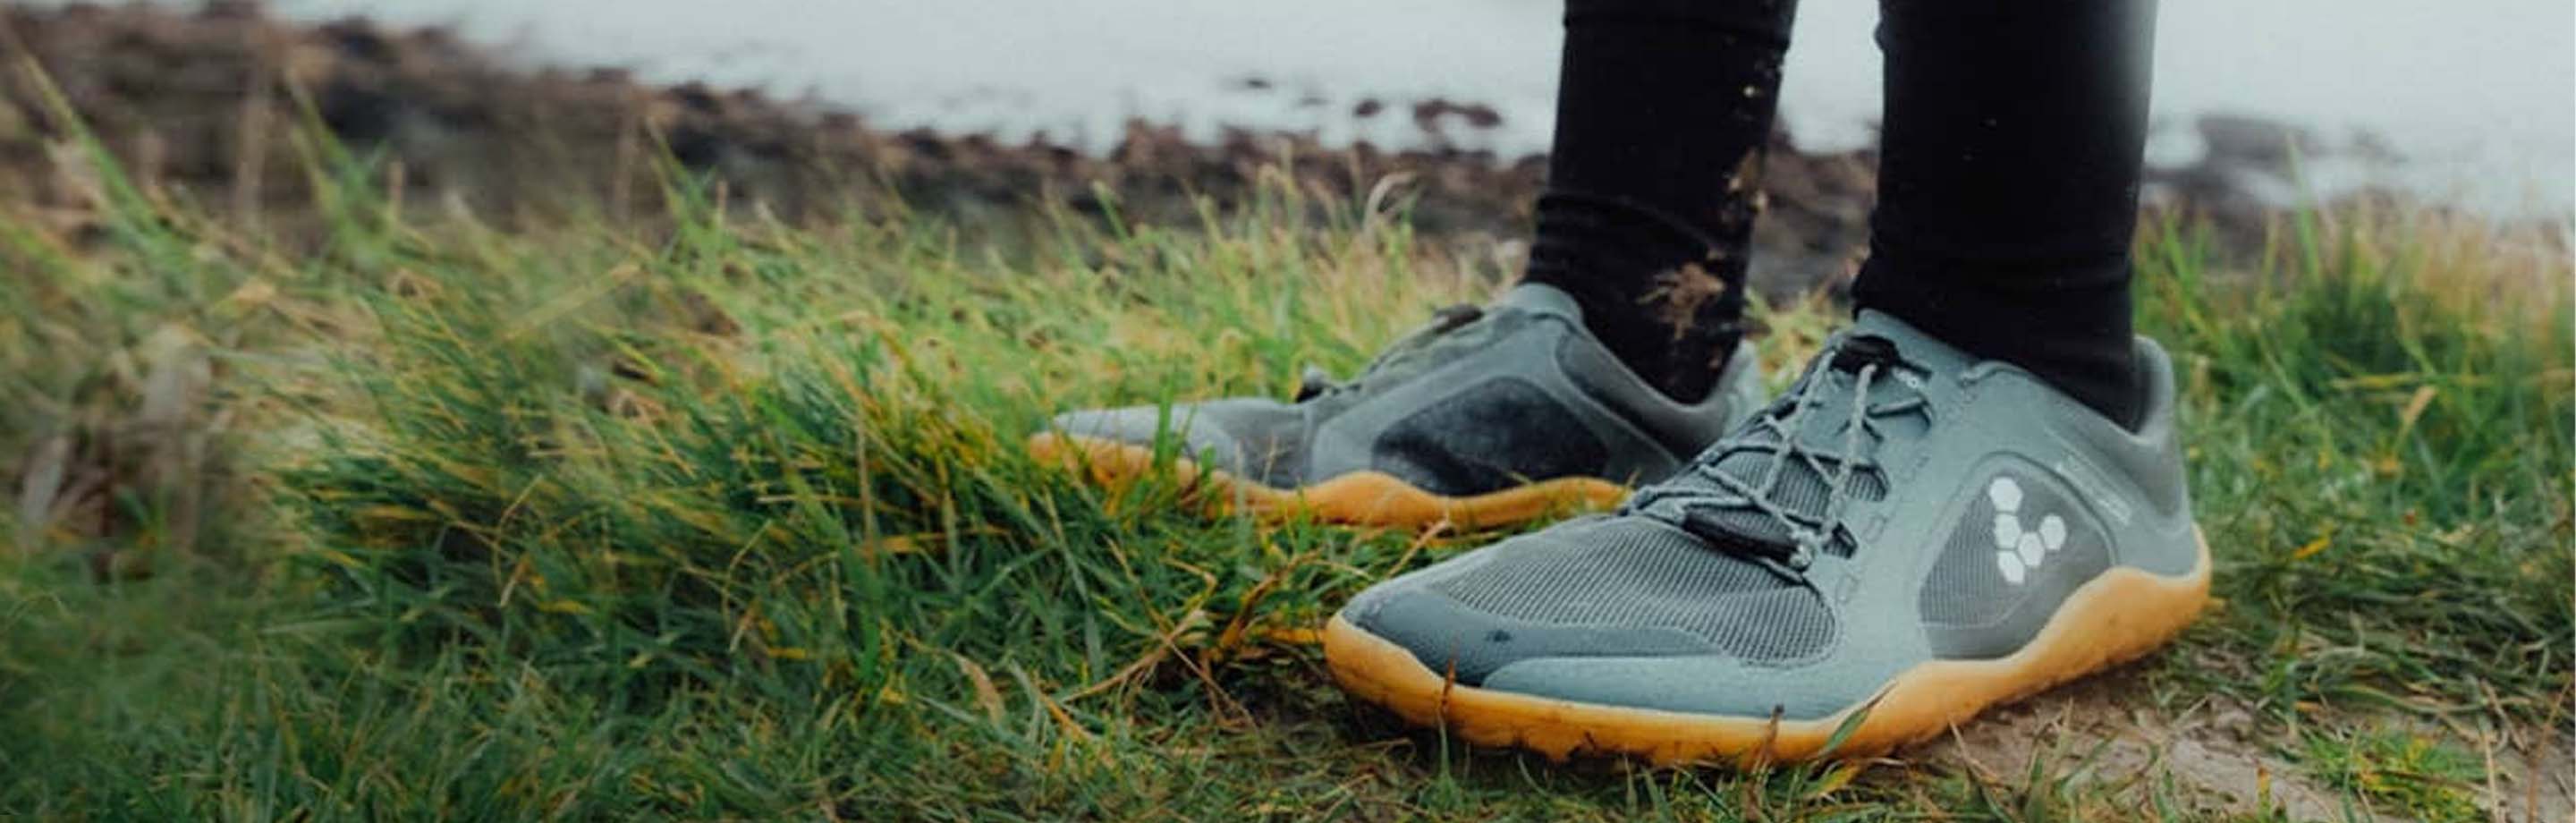 Vivobarefoot - Barefoot Shoes for every Occasion